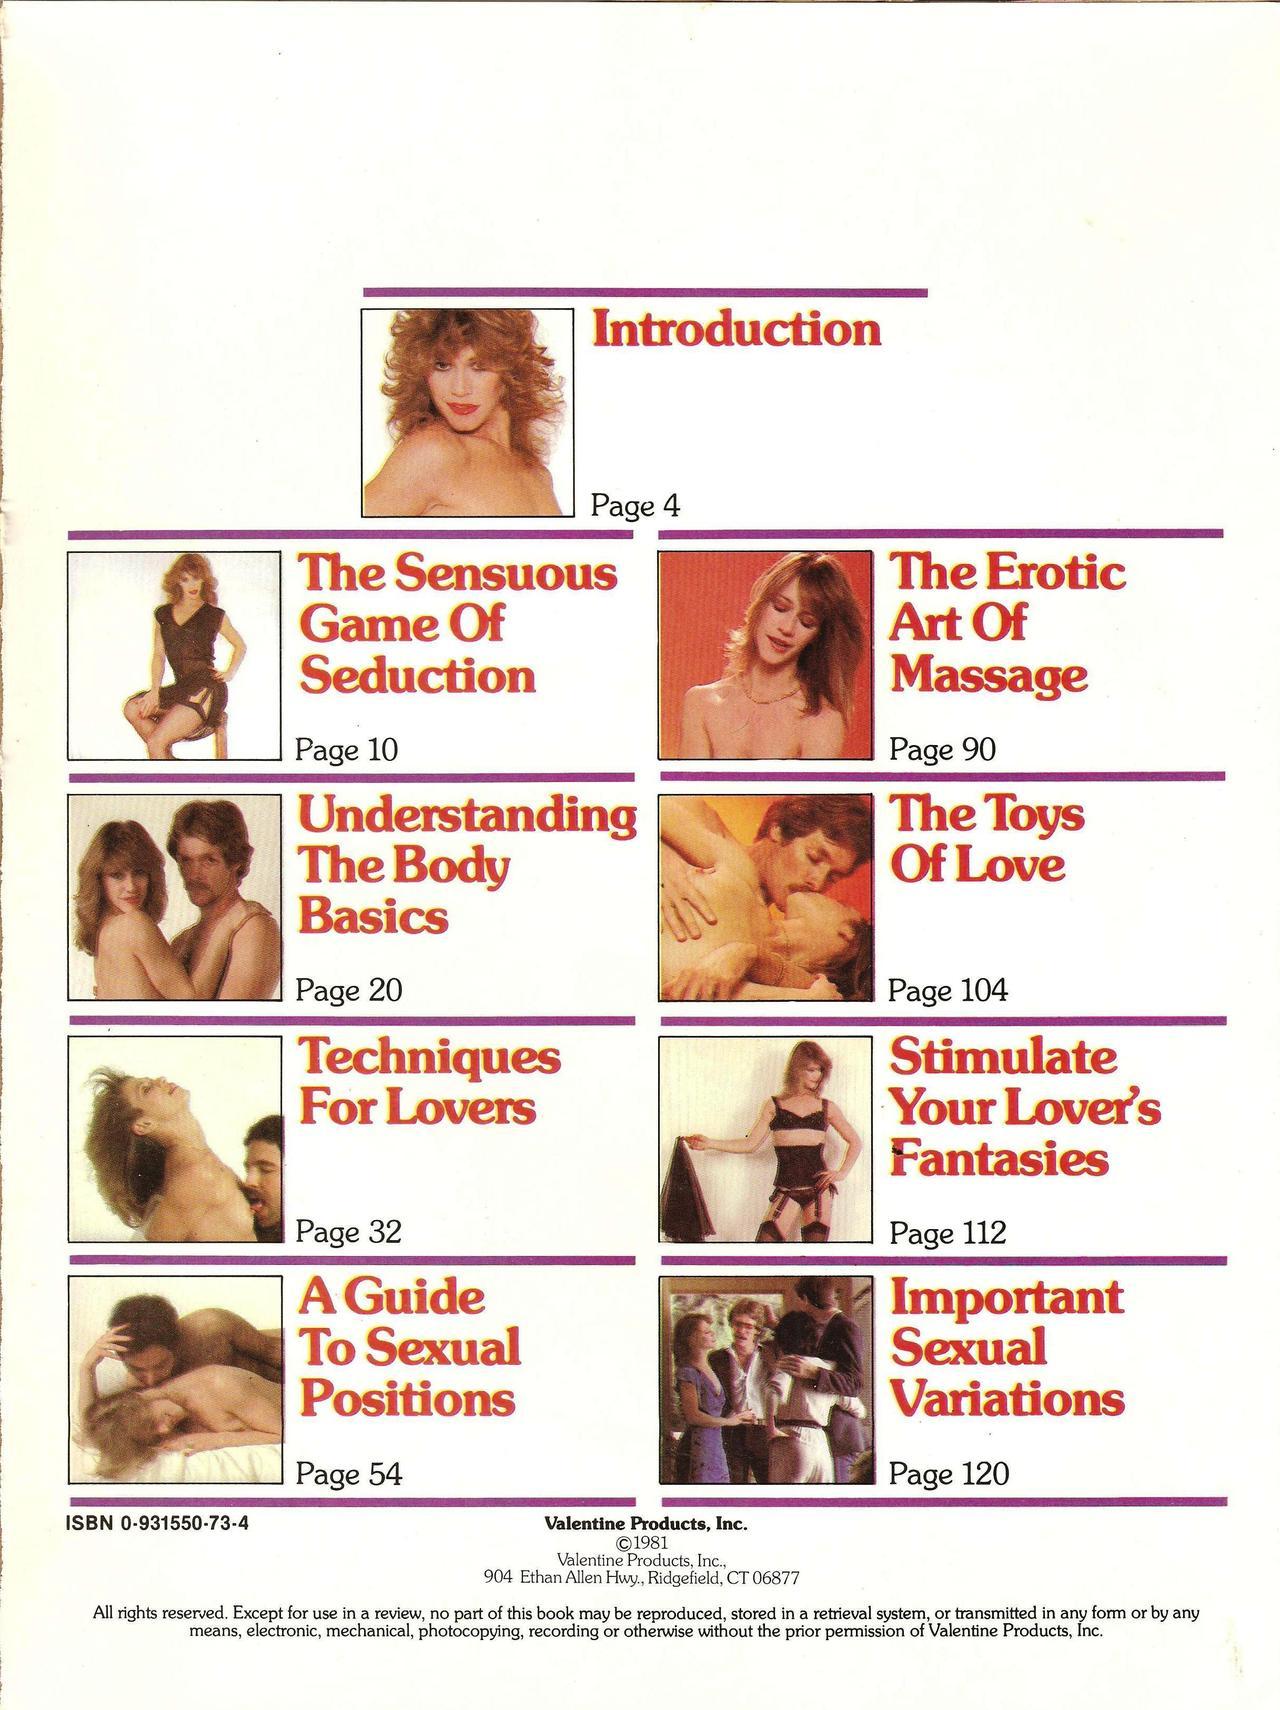 Table of Contents from Sensual Secrets, 1981